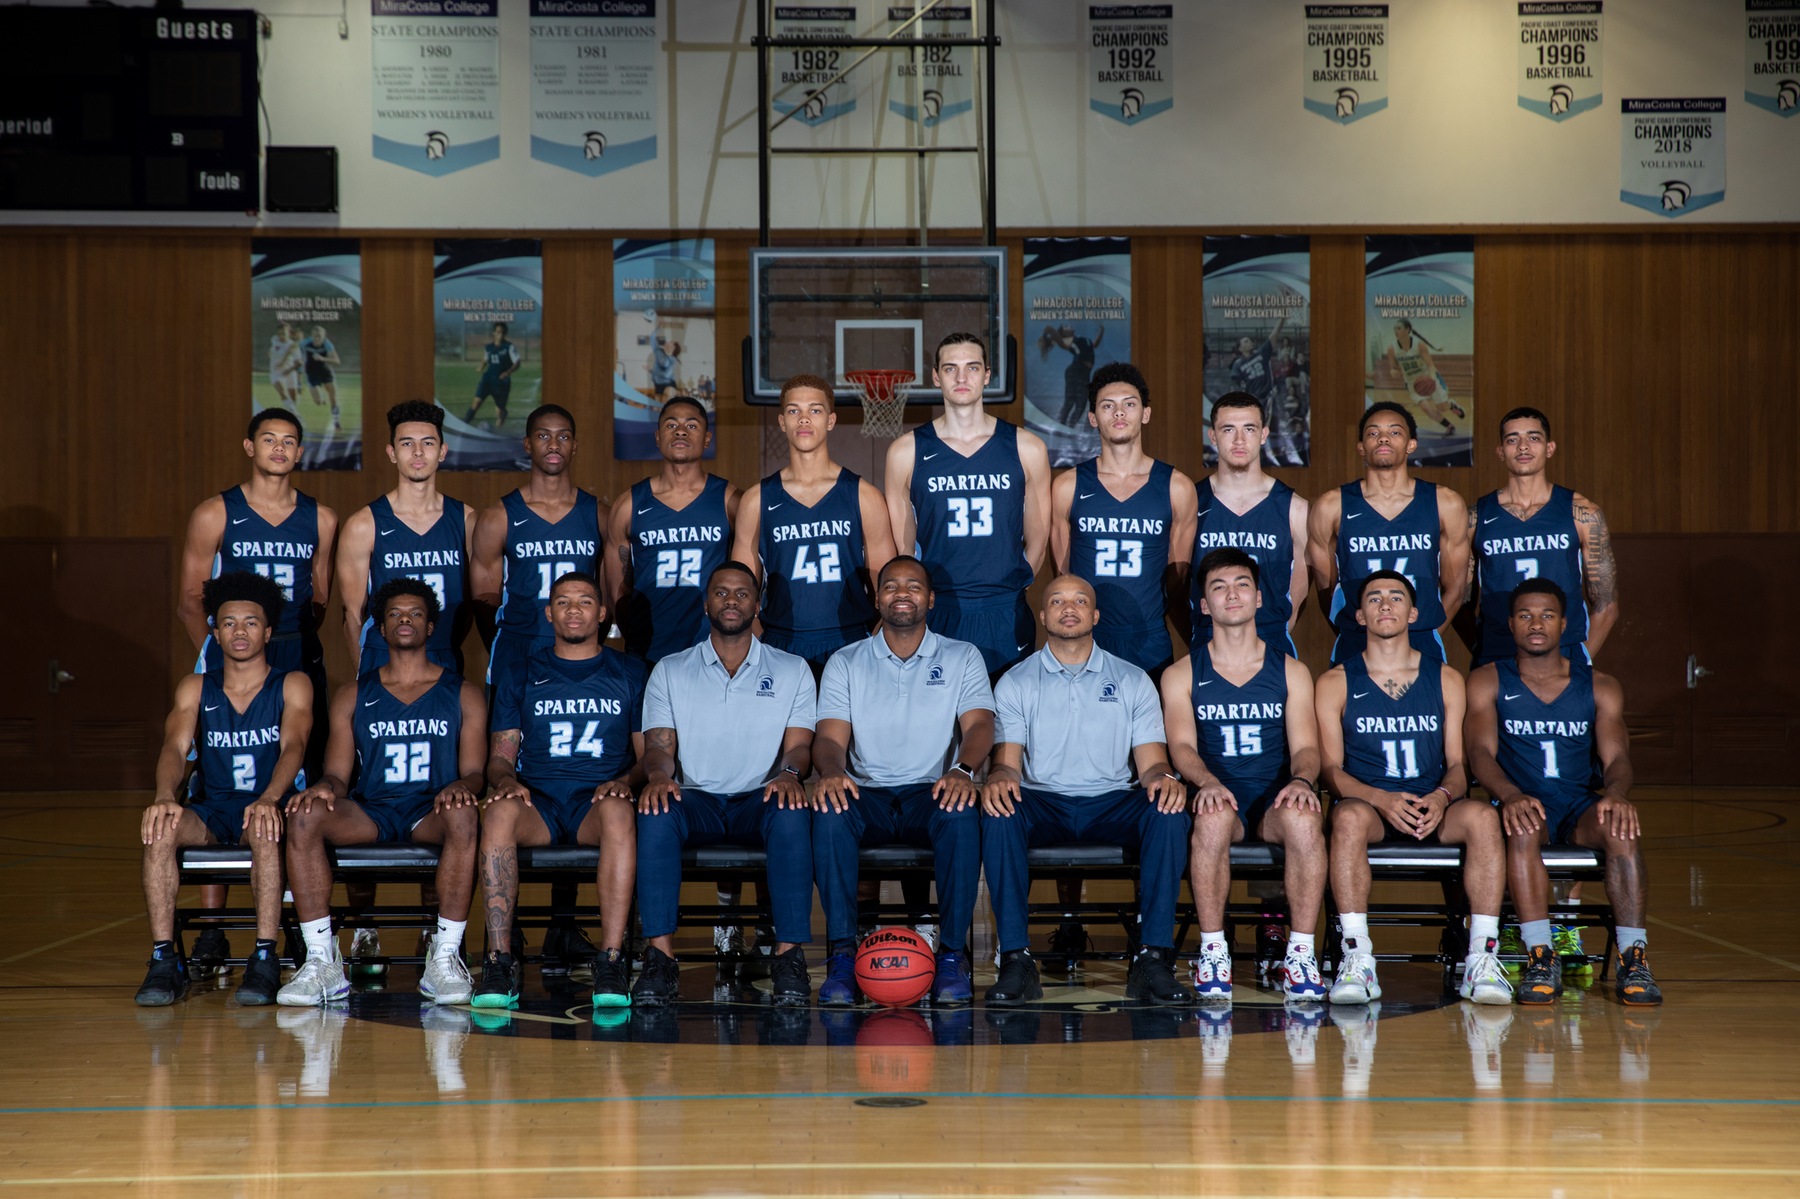 Men's Basketball team picture 2019-20.